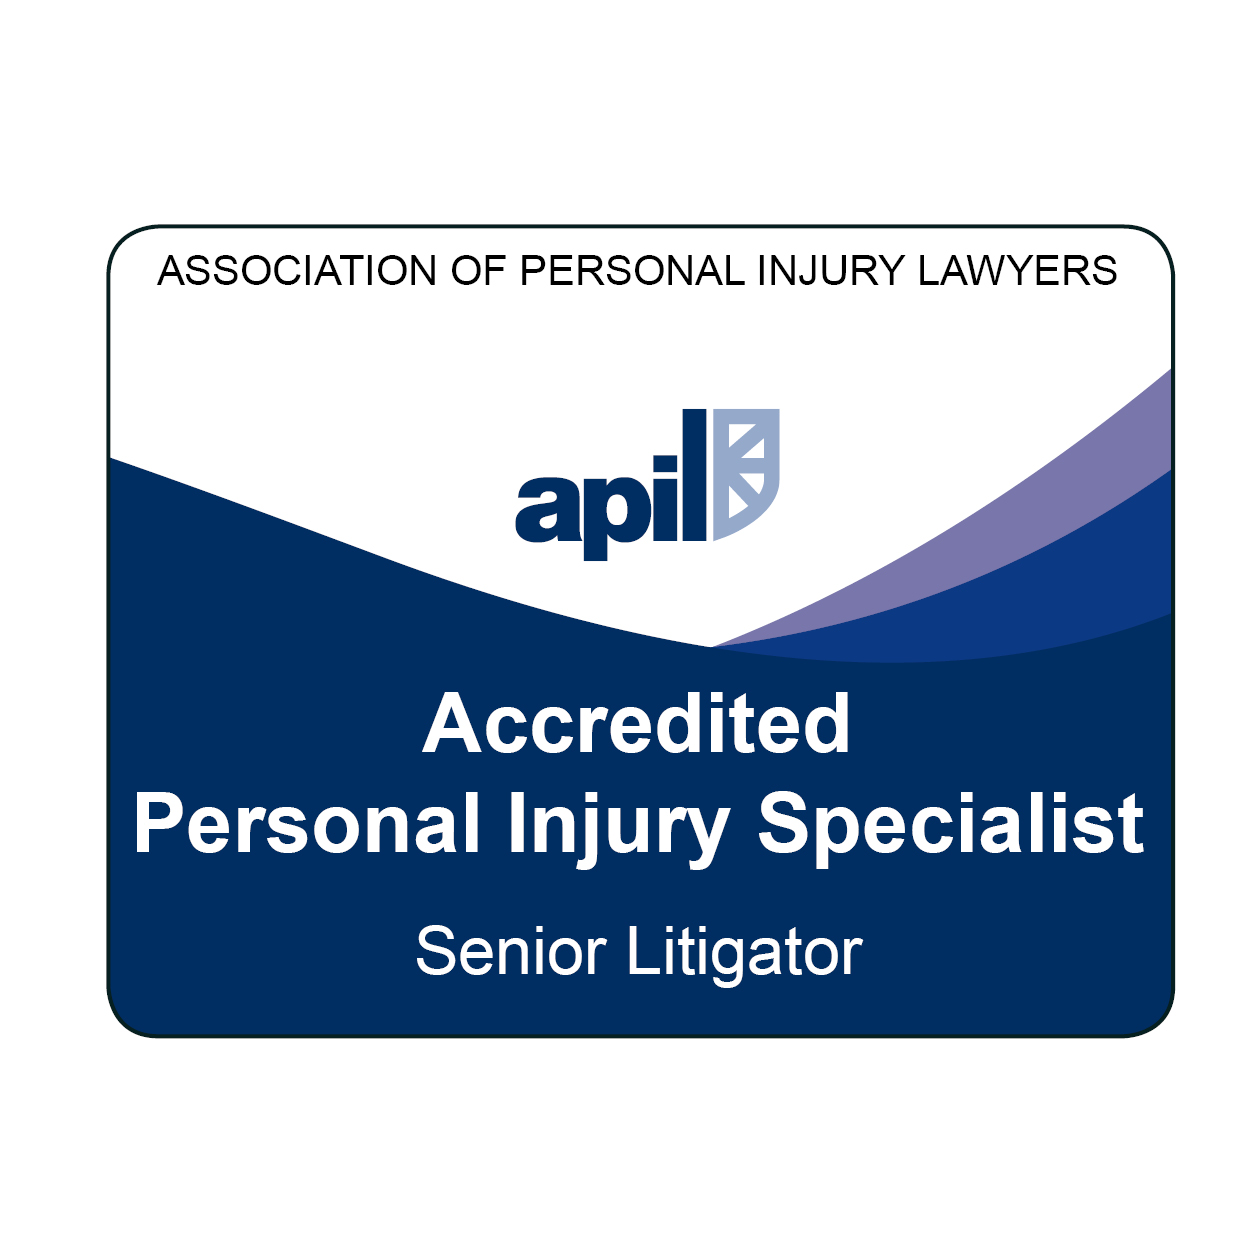 Accredited Personal Injury Specialist